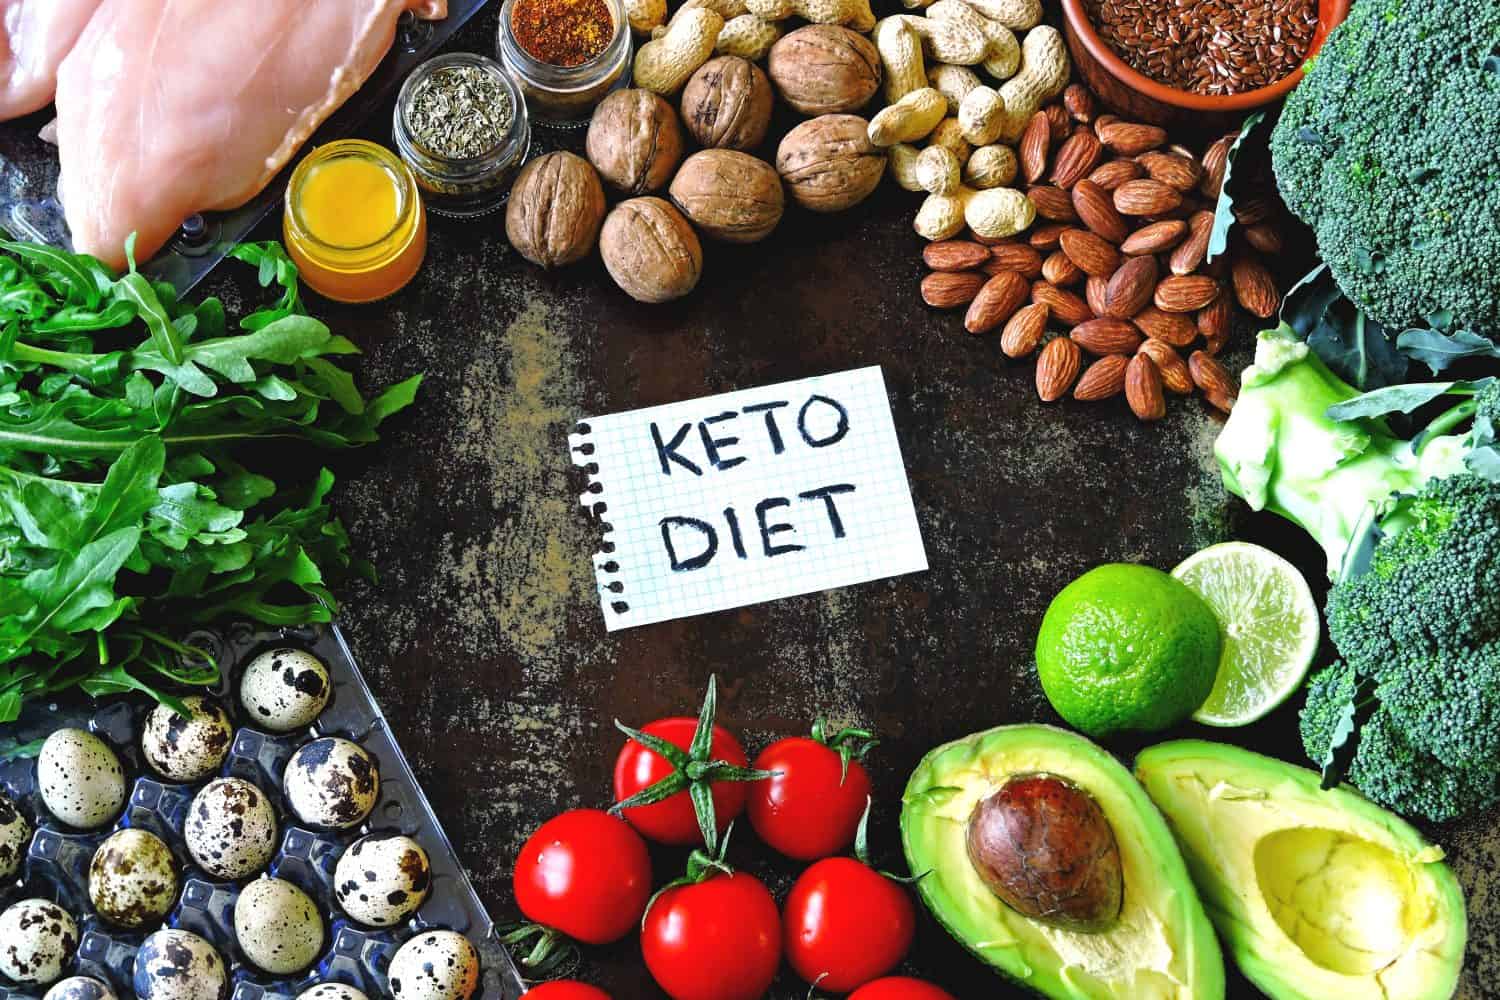 Ketogenic diet concept. A set of products of the low carb keto diet. Green vegetables, nuts, chicken fillet, flax seeds, quail eggs, cherry tomatoes. Healthy food concept. Keto diet food frame.